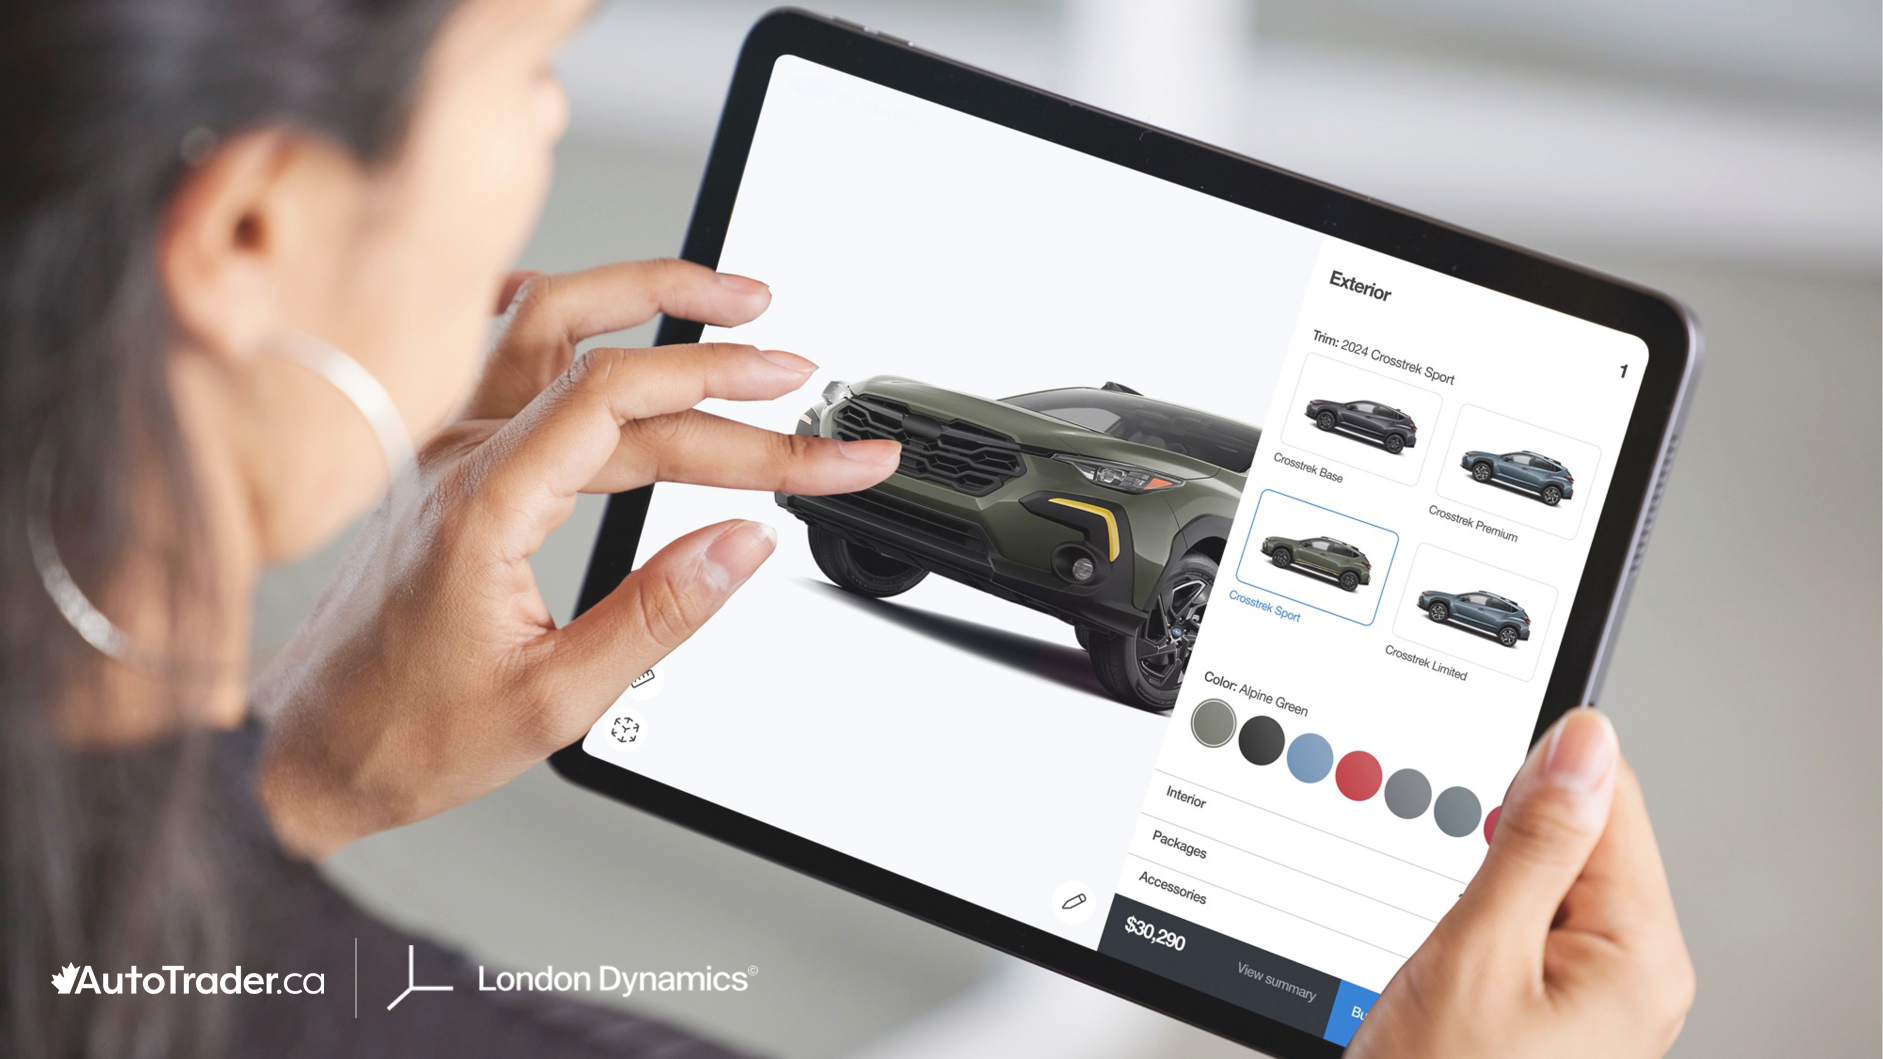 AutoTrader Canada partners with cutting-edge product visualisation firm London Dynamics to transform the car buying experience for Canadian consumers